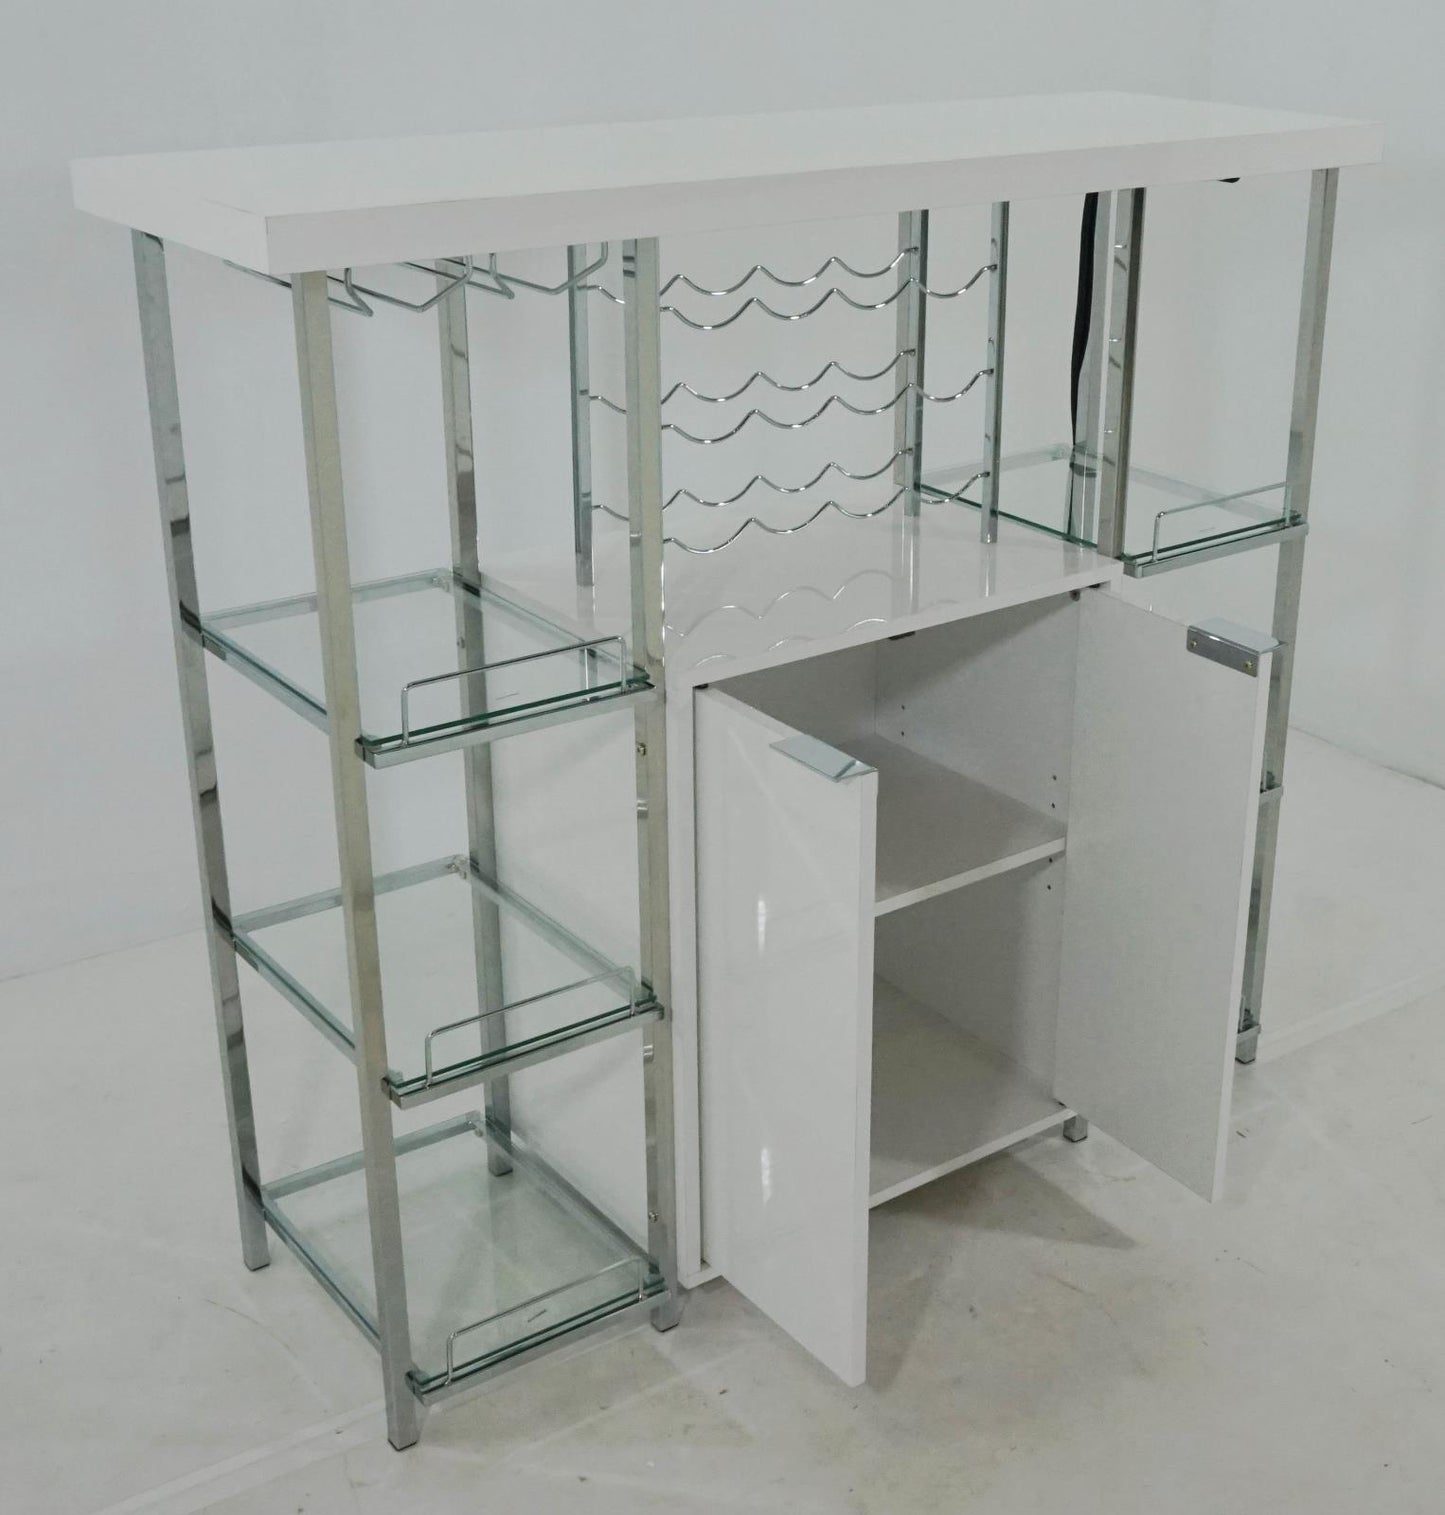 Gallimore - Gallimore 2-door Bar Cabinet with Glass Shelf High Glossy White and Chrome